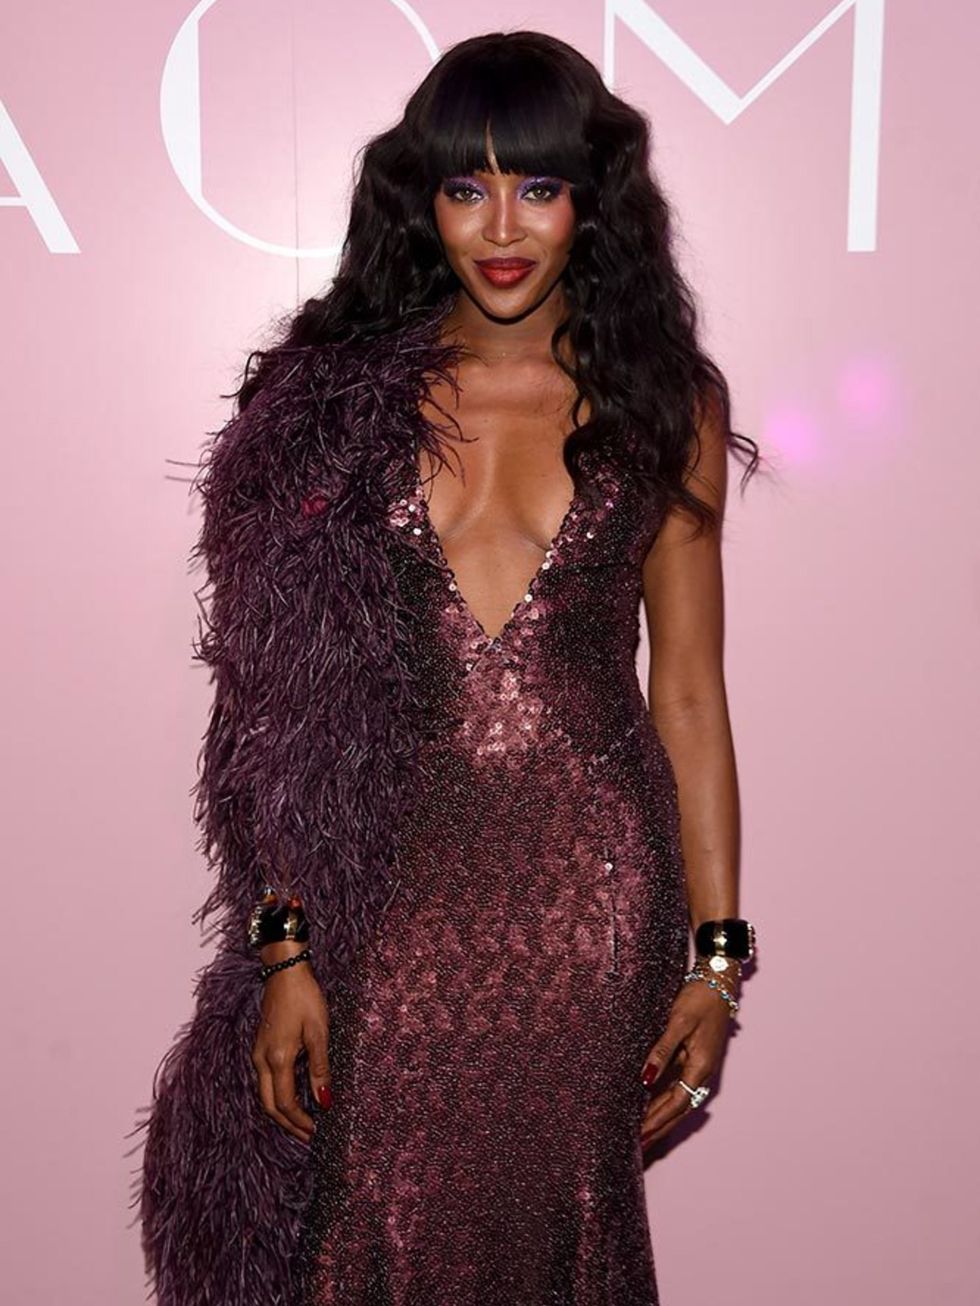 Naomi Campbell at the launch of Naomi hosted by Marc Jacobs and Benedikt Taschen at the Diamond Horseshoe in New York, April 2016.